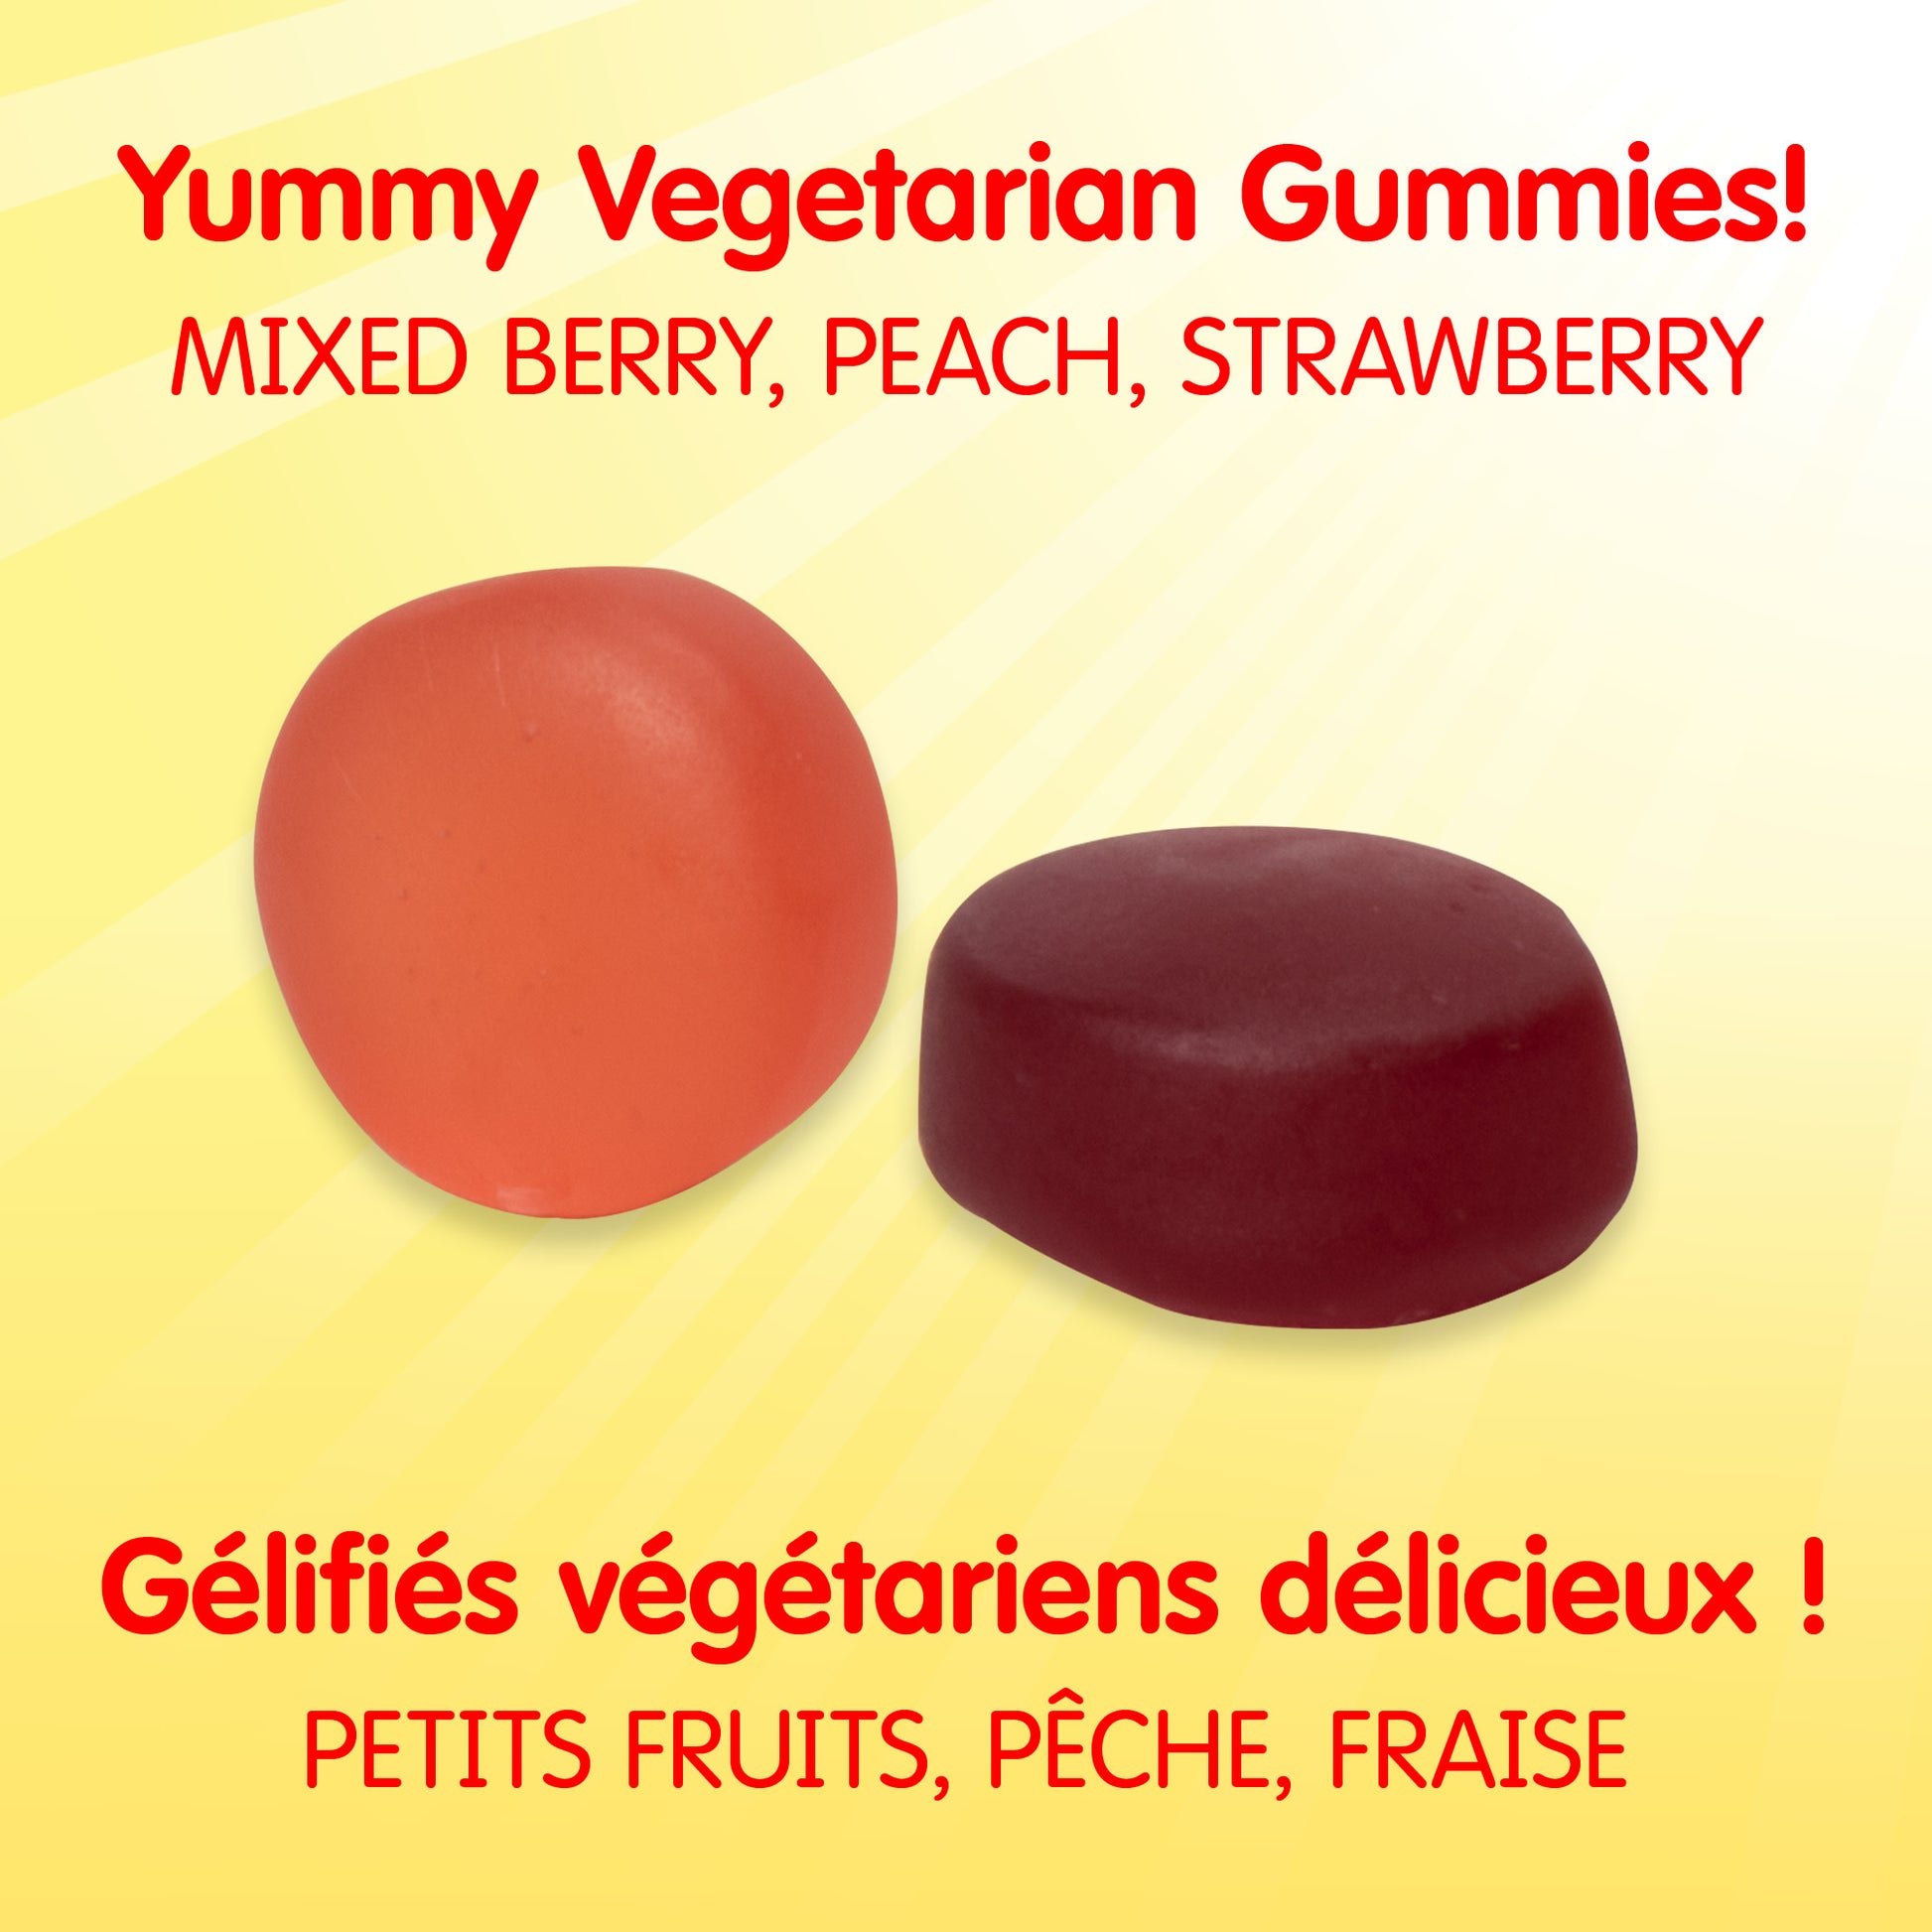 specifications-Vitamine D3 600 UI petits fruits • pêche • fraise for Sesame Street®